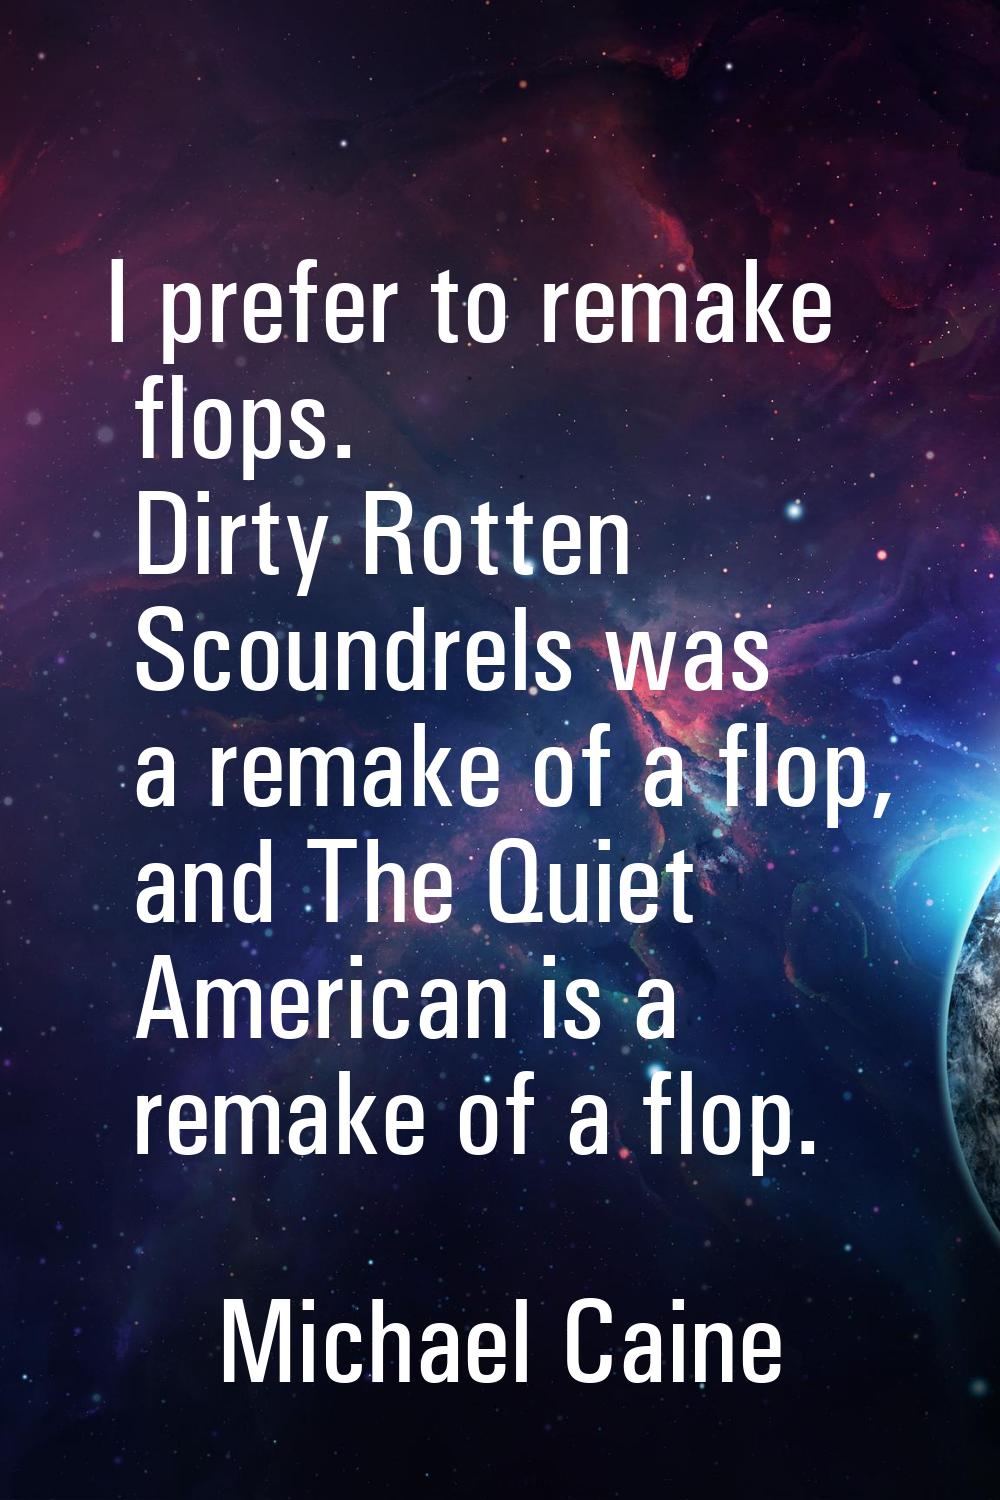 I prefer to remake flops. Dirty Rotten Scoundrels was a remake of a flop, and The Quiet American is